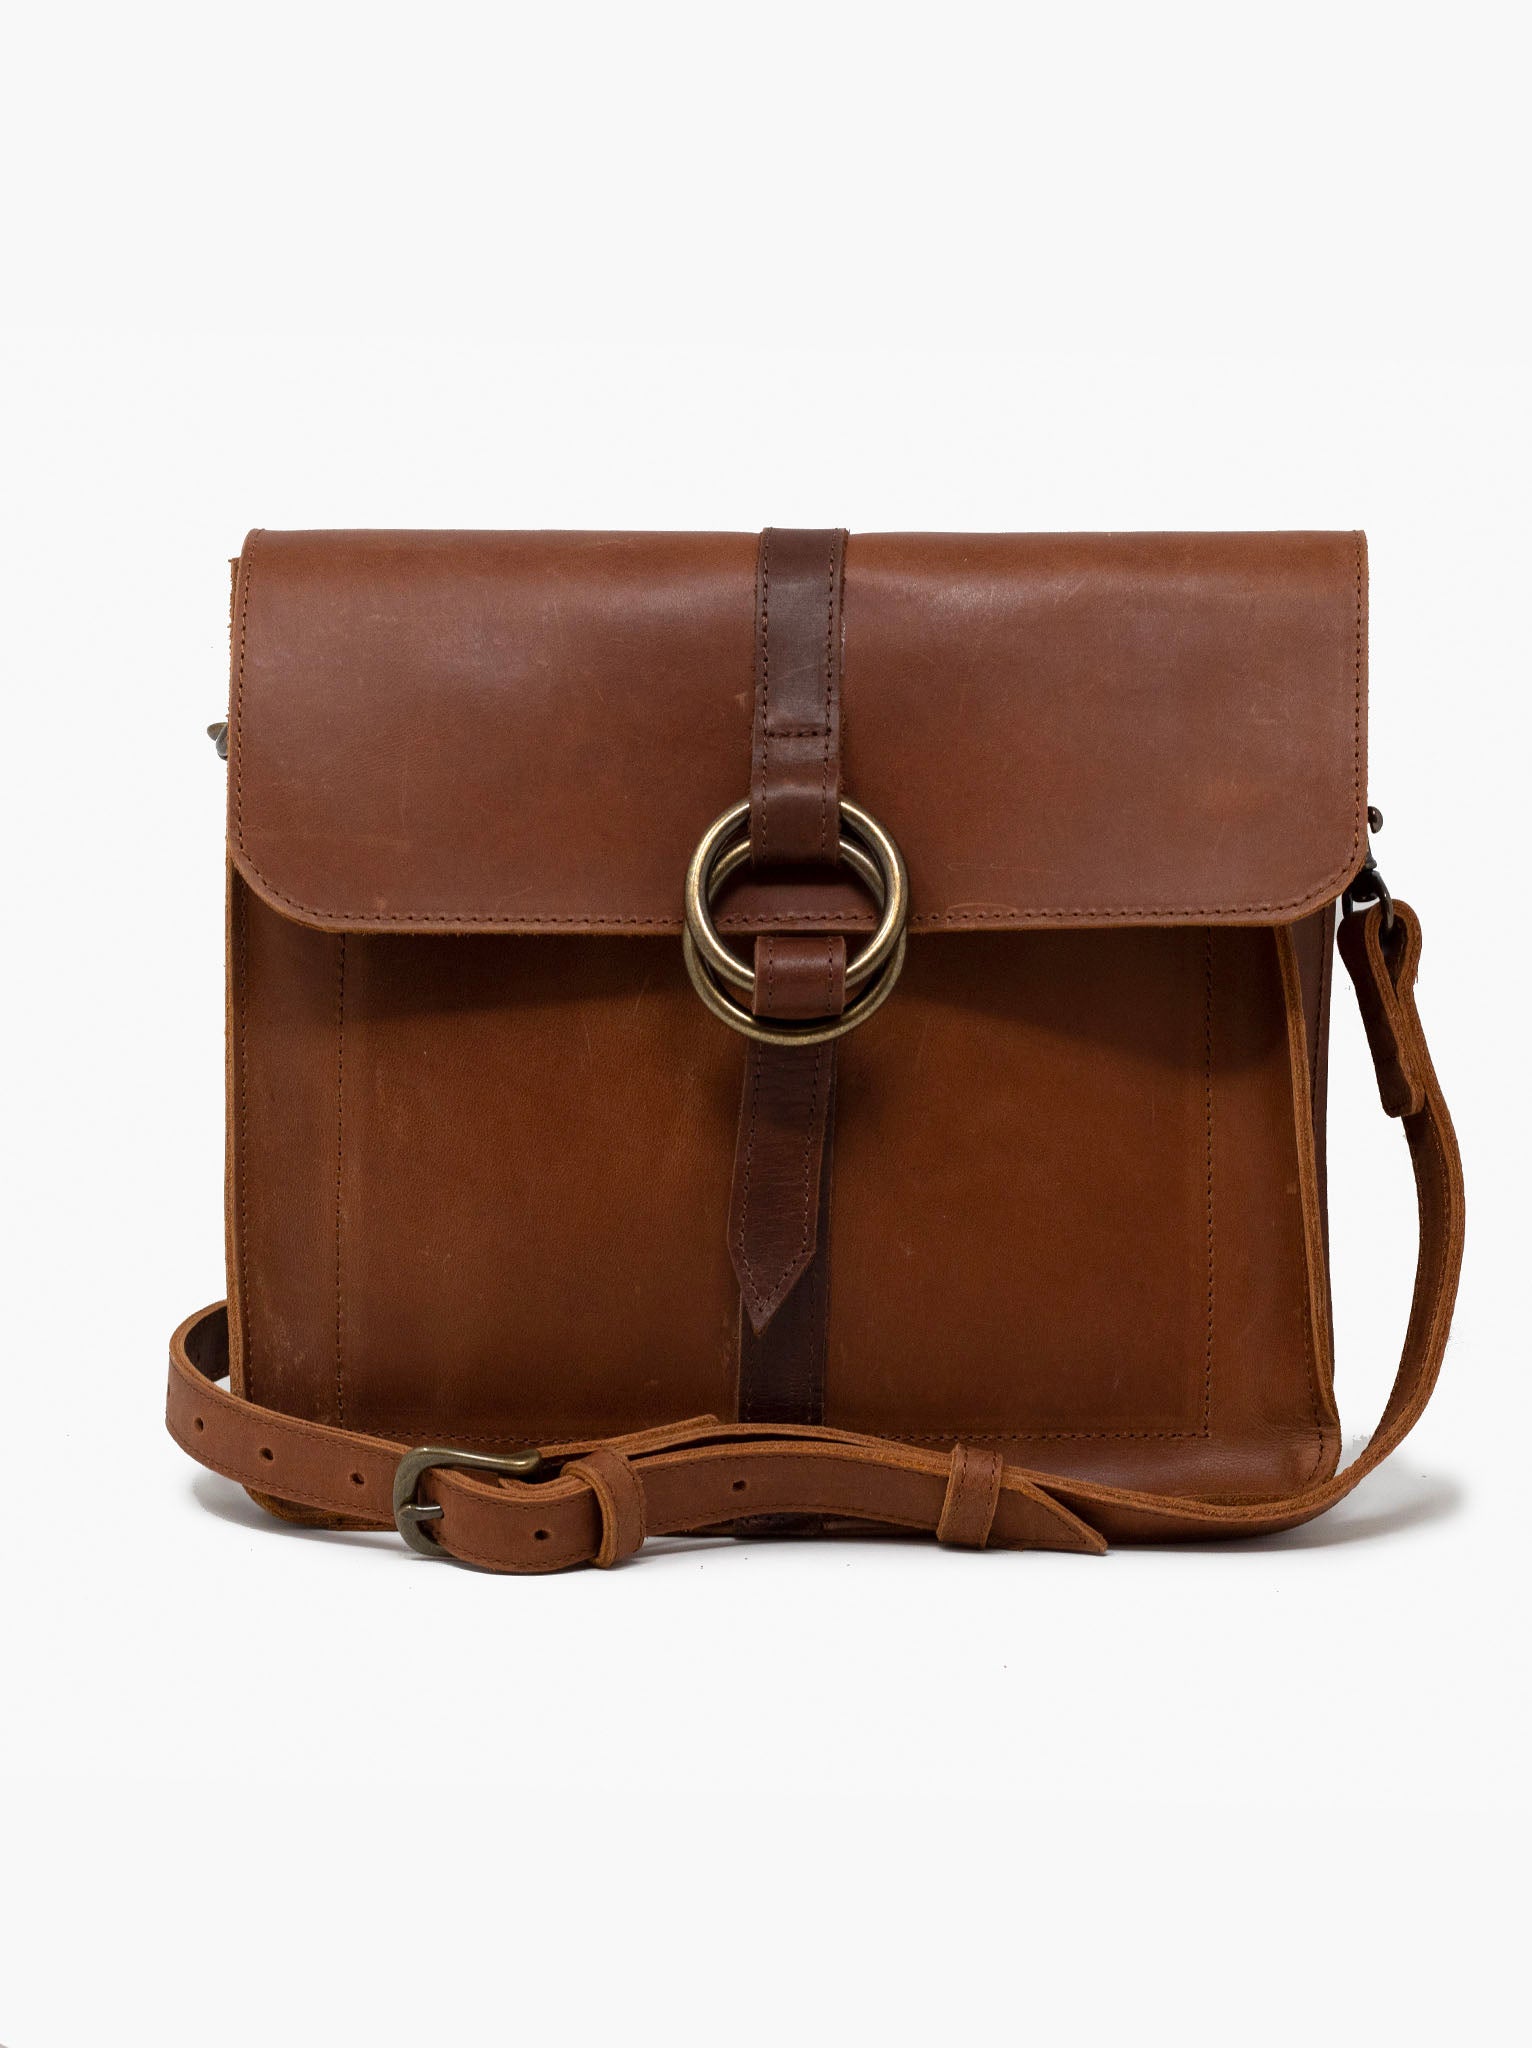 ABLE Ebisse Ring Closure Crossbody